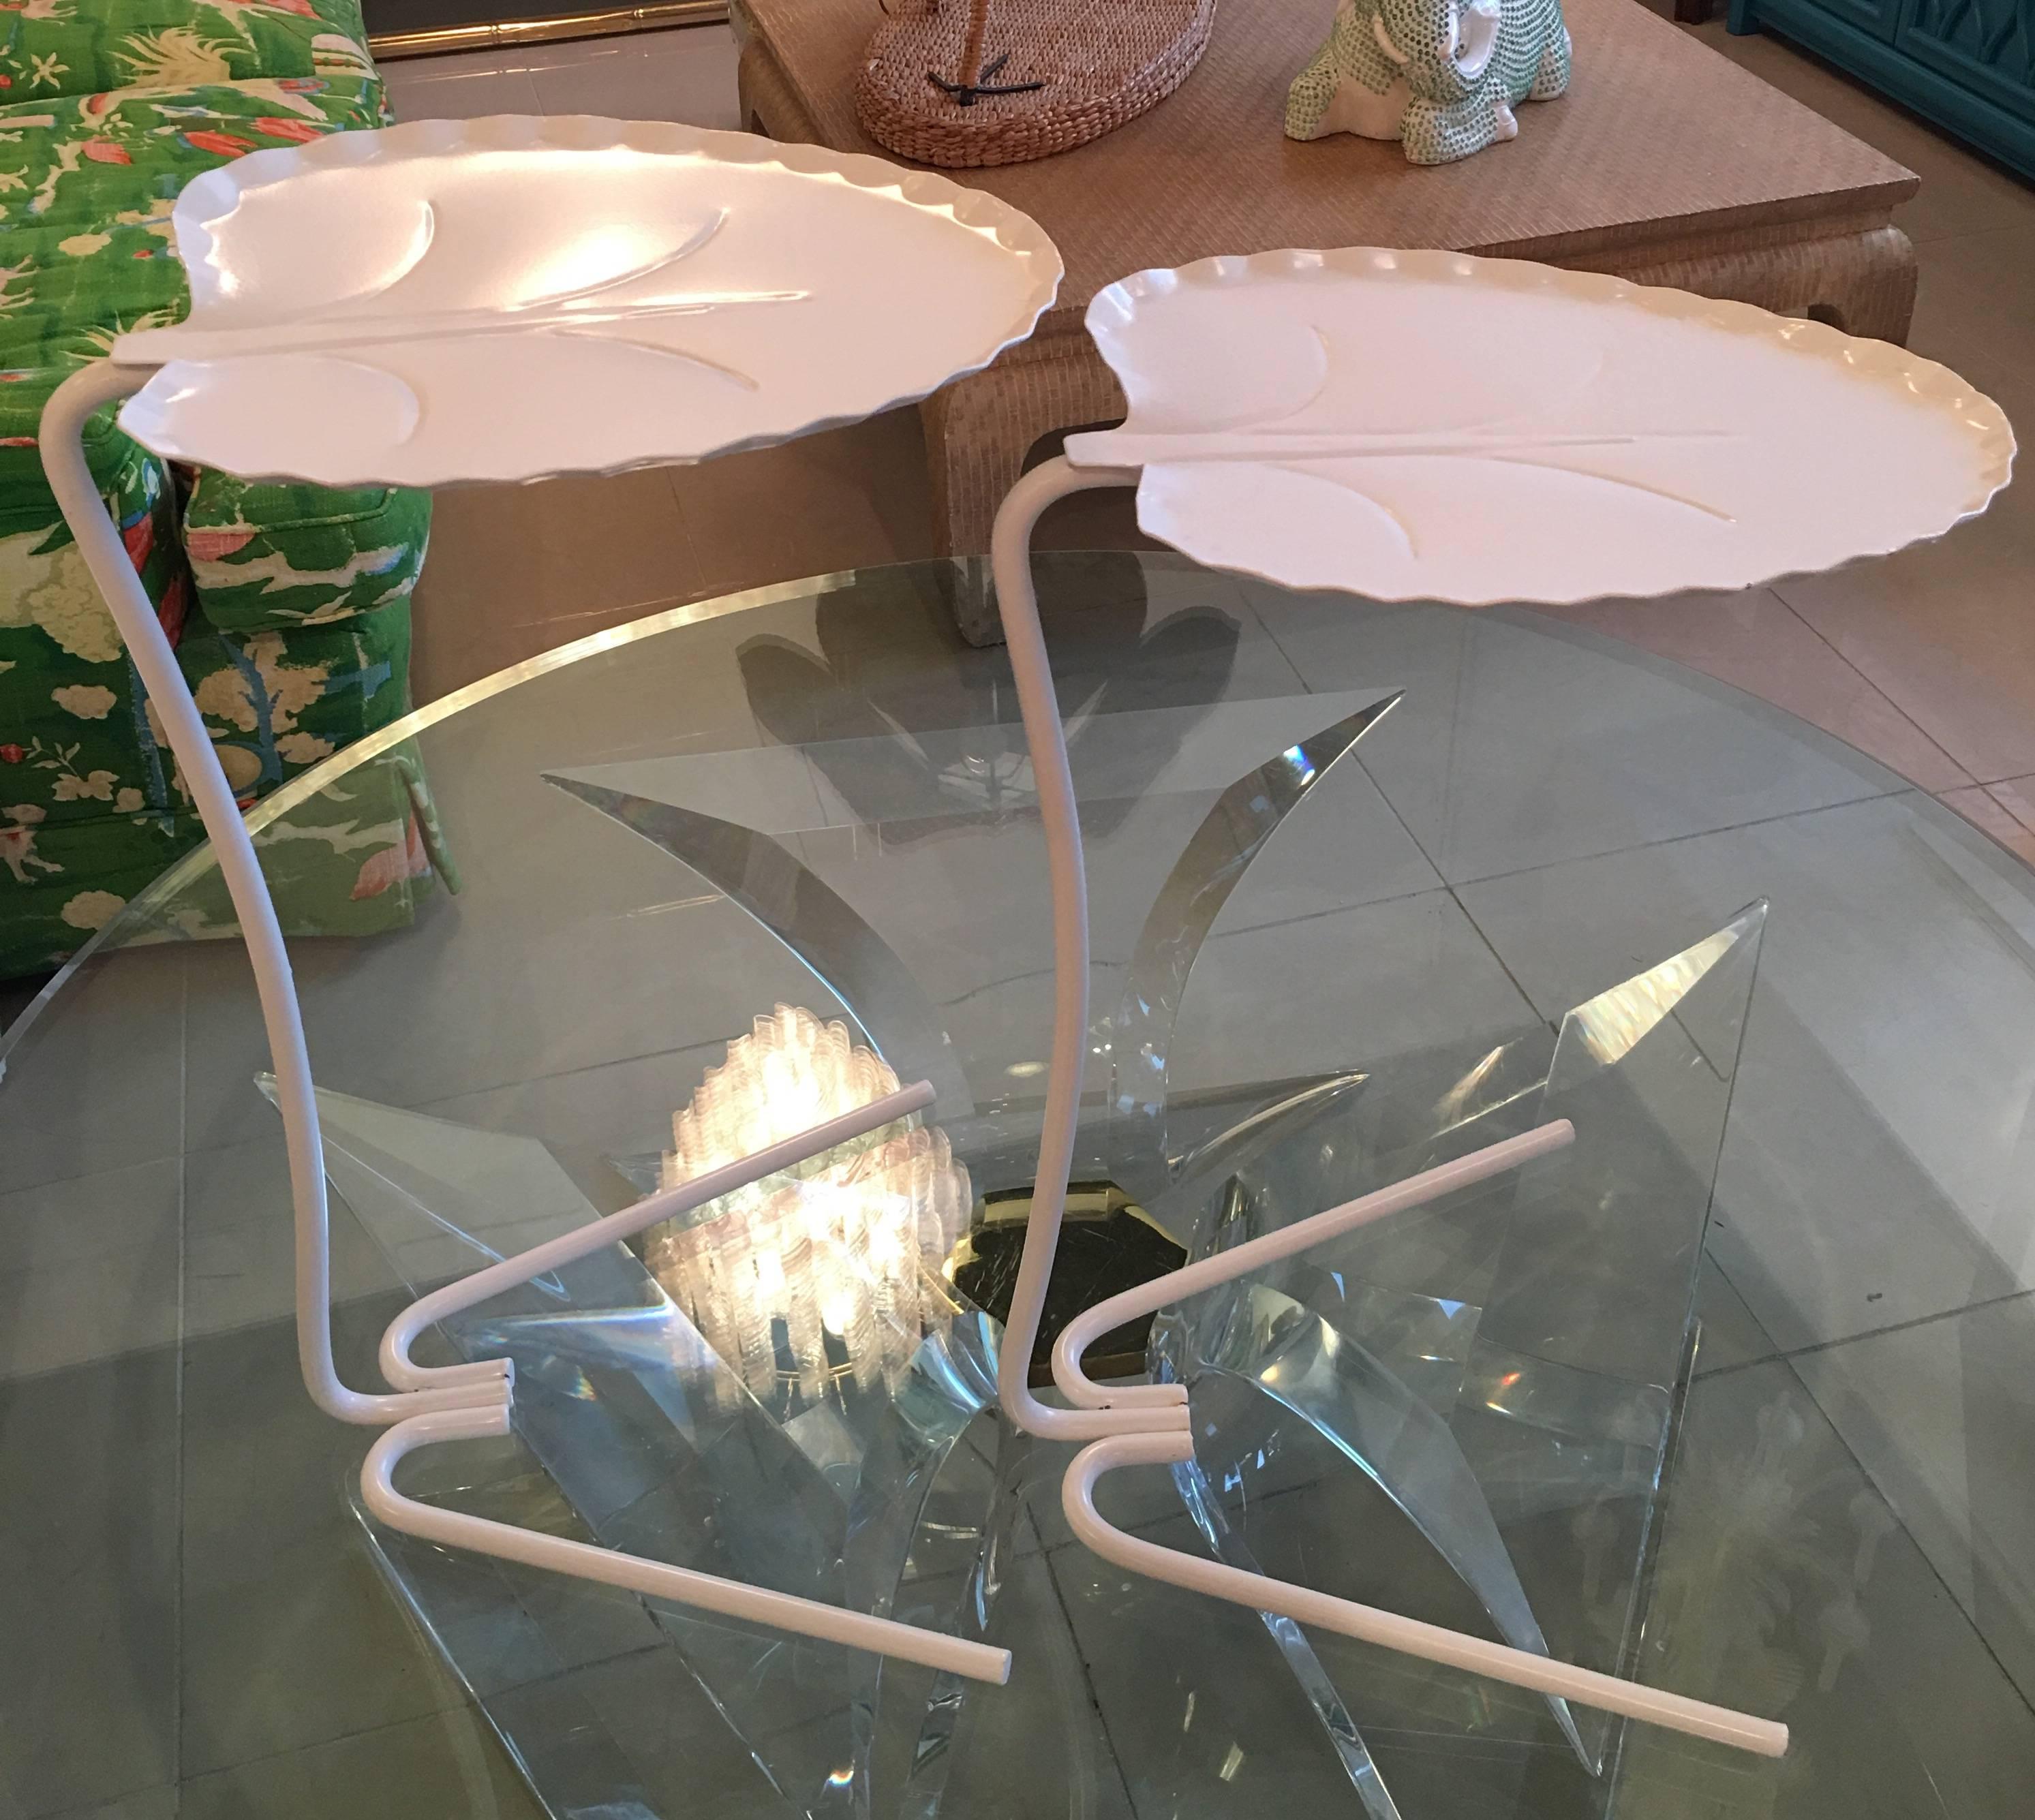 lily pad nesting tables